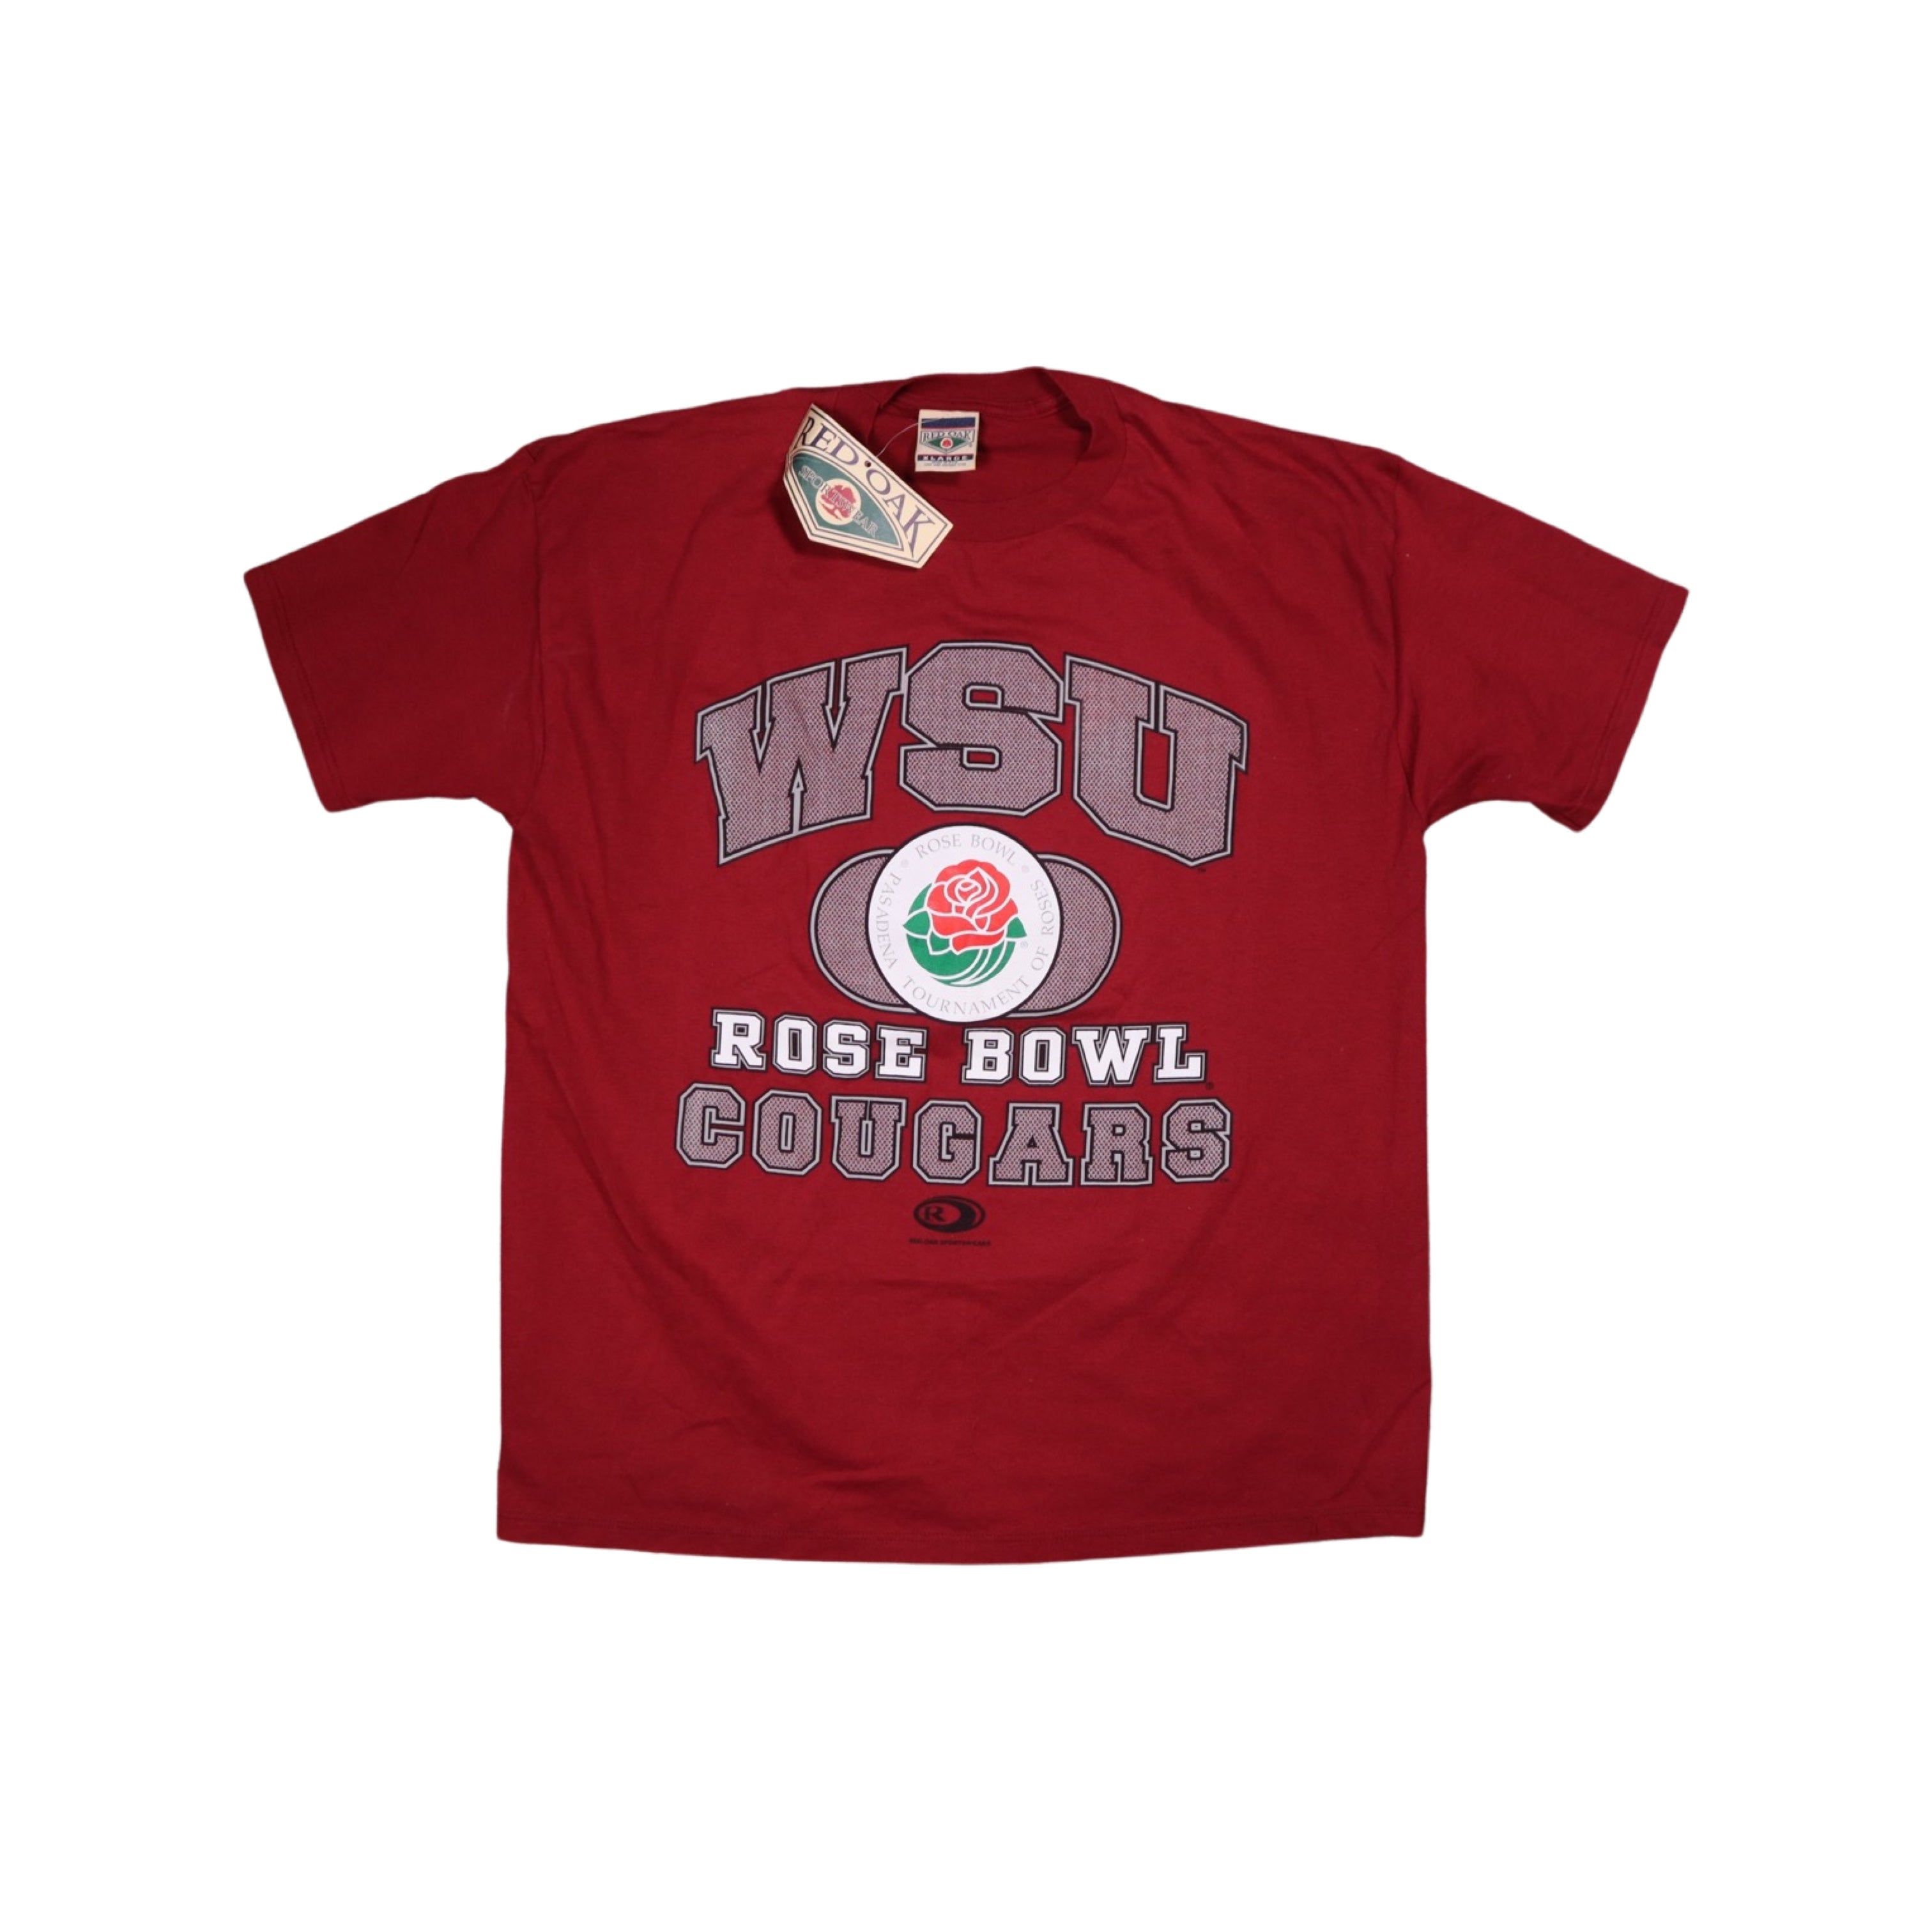 New With Tags Washington State Rose Bowl 1998 T-Shirt (XL)